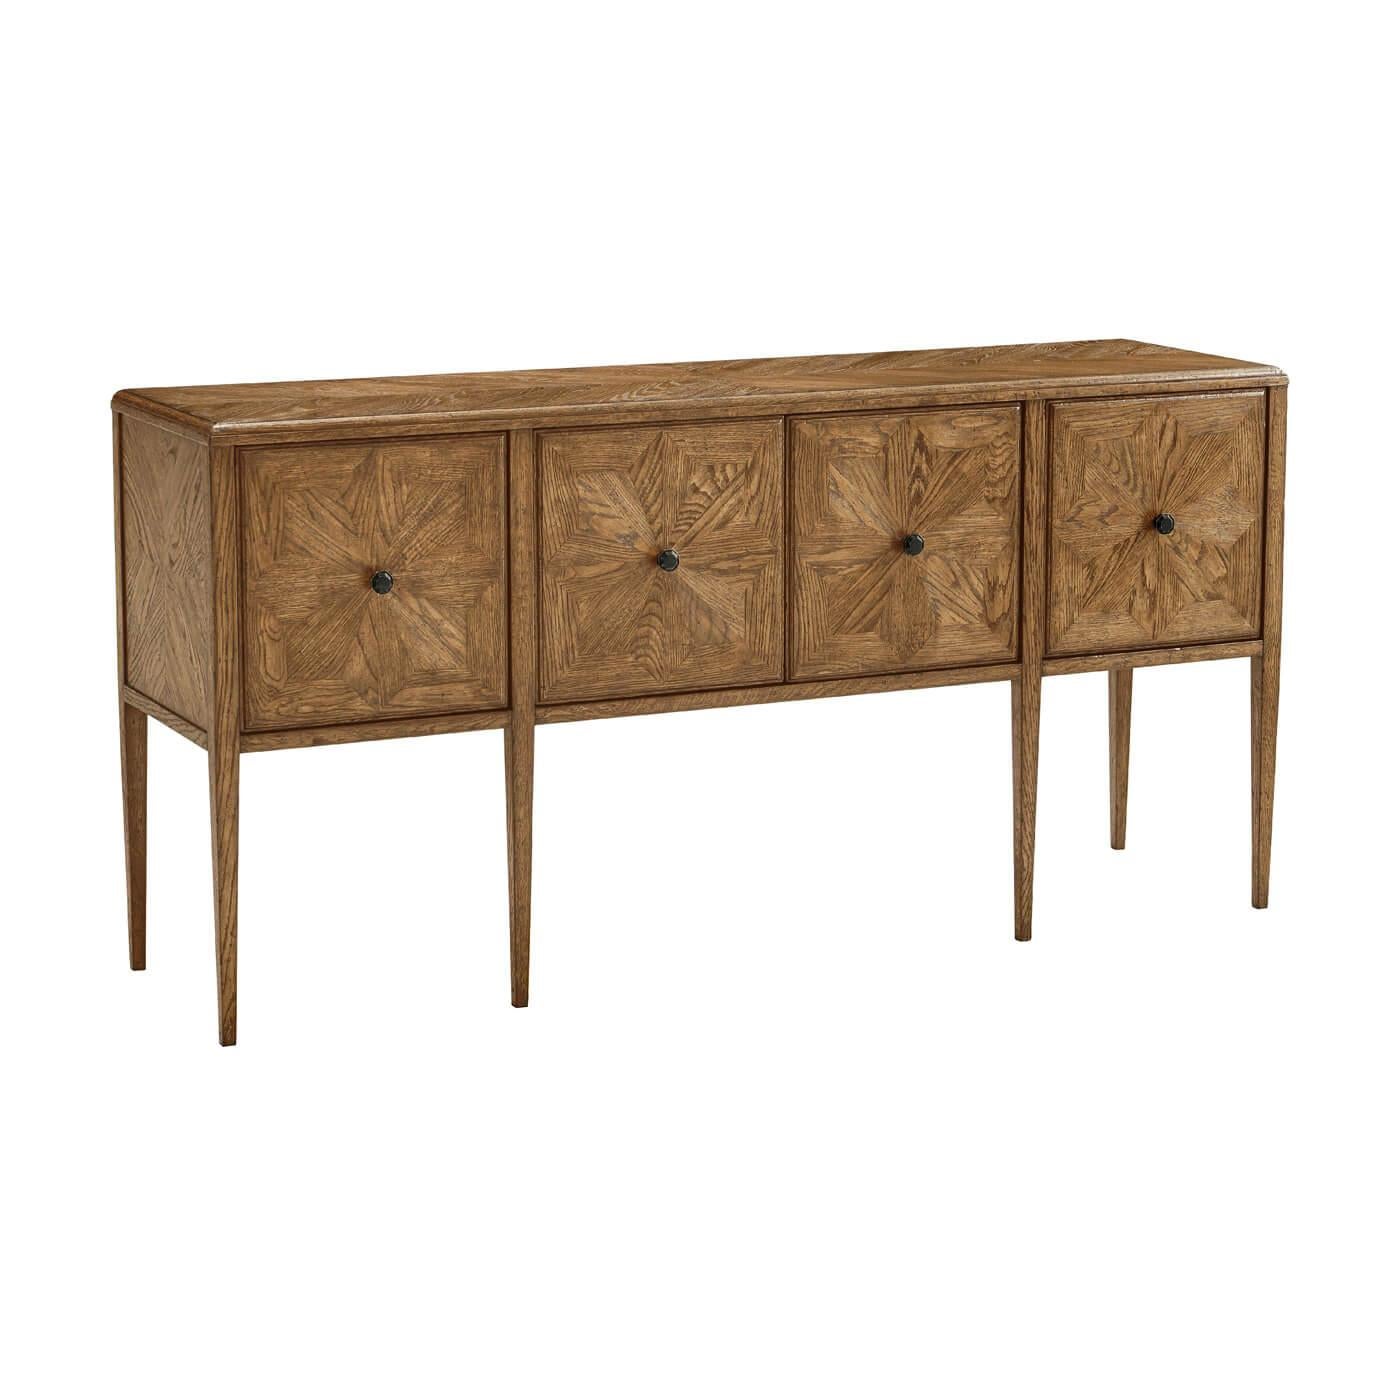 A rustic-style oak four-door buffet with radial star-patterned veneer. Its mosaic-inspired doors are accented with Verde Bronze finish hardware.
Shown in Dawn Finish
Dimensions
68.5